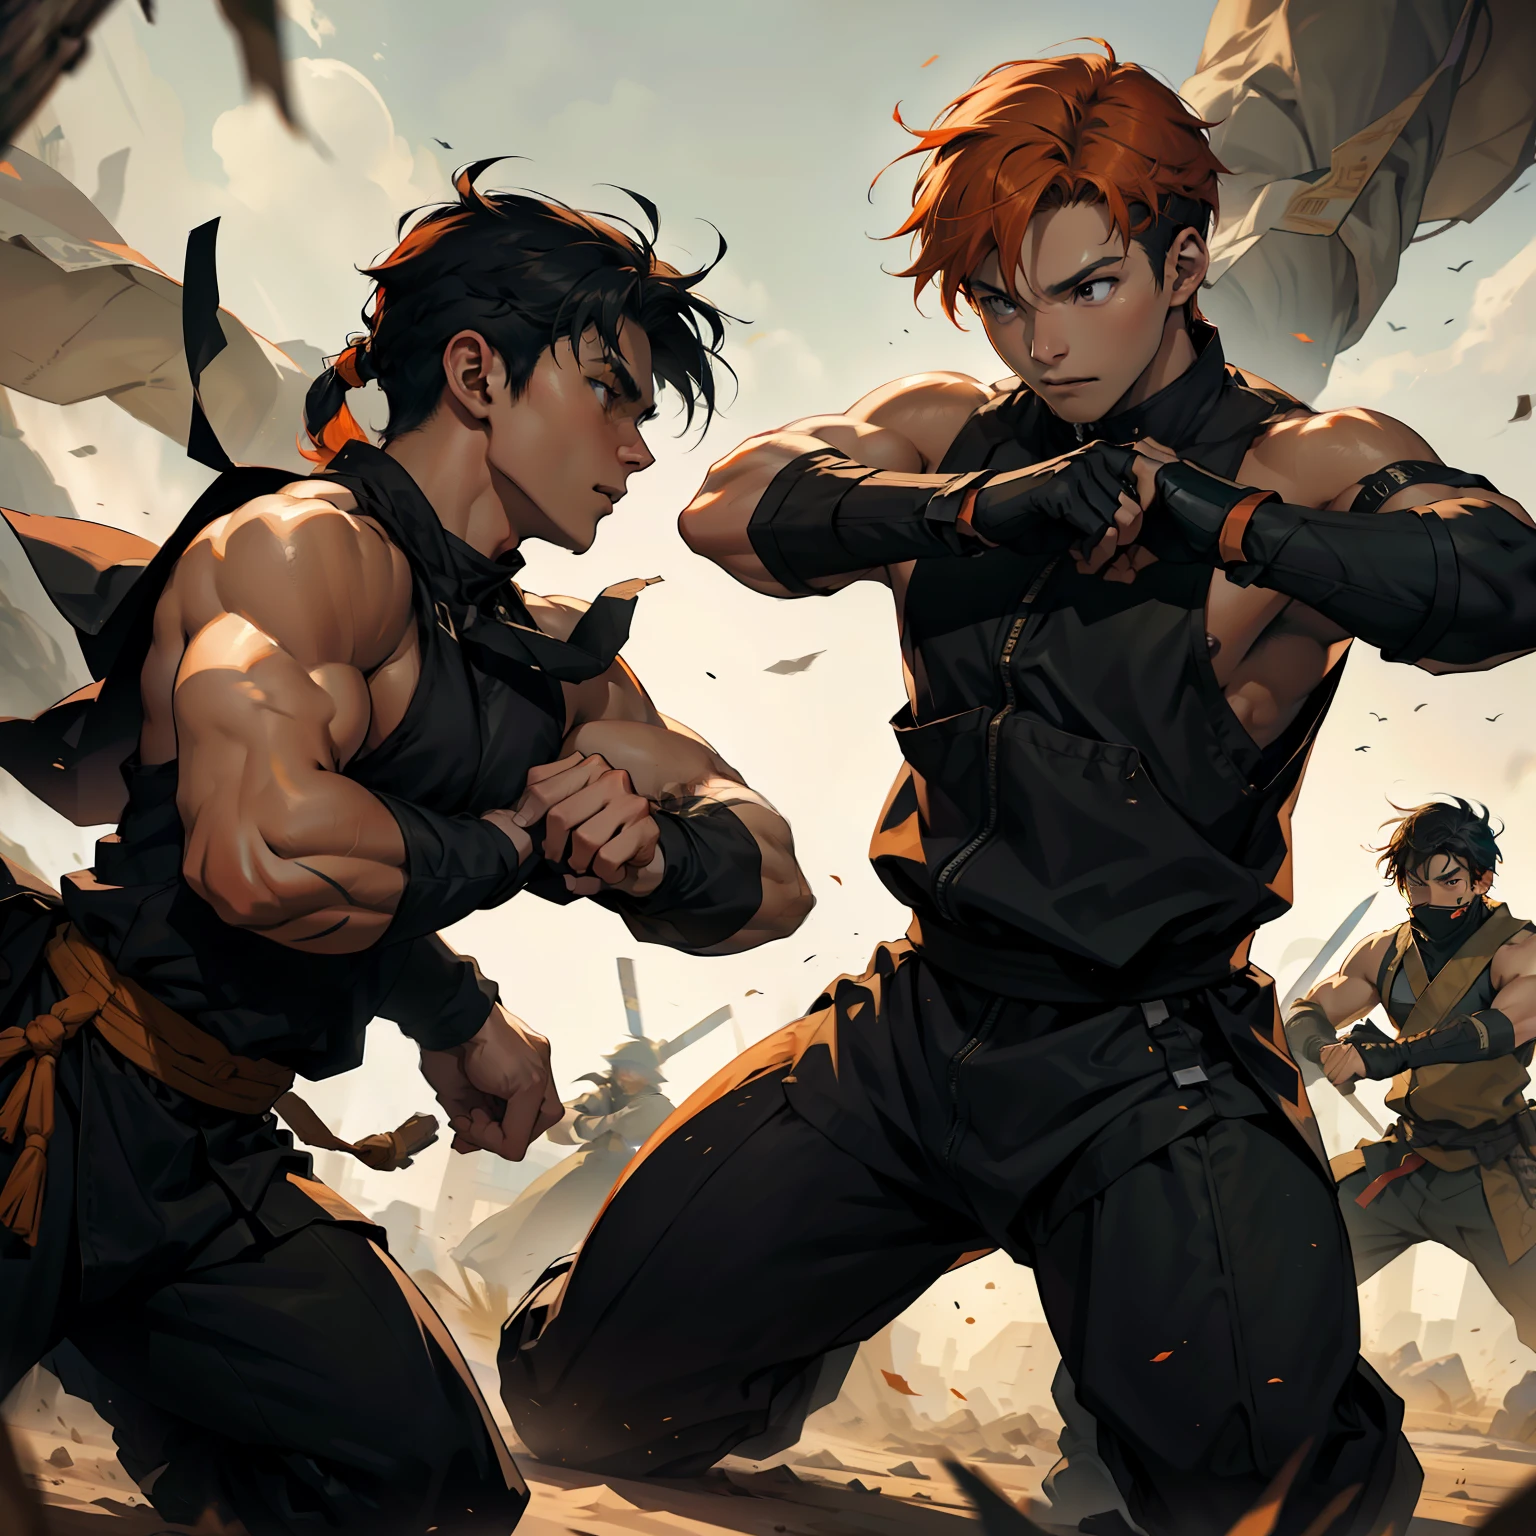 Battle scene between two 15-year-old ninjas with orange hair and the other black hair